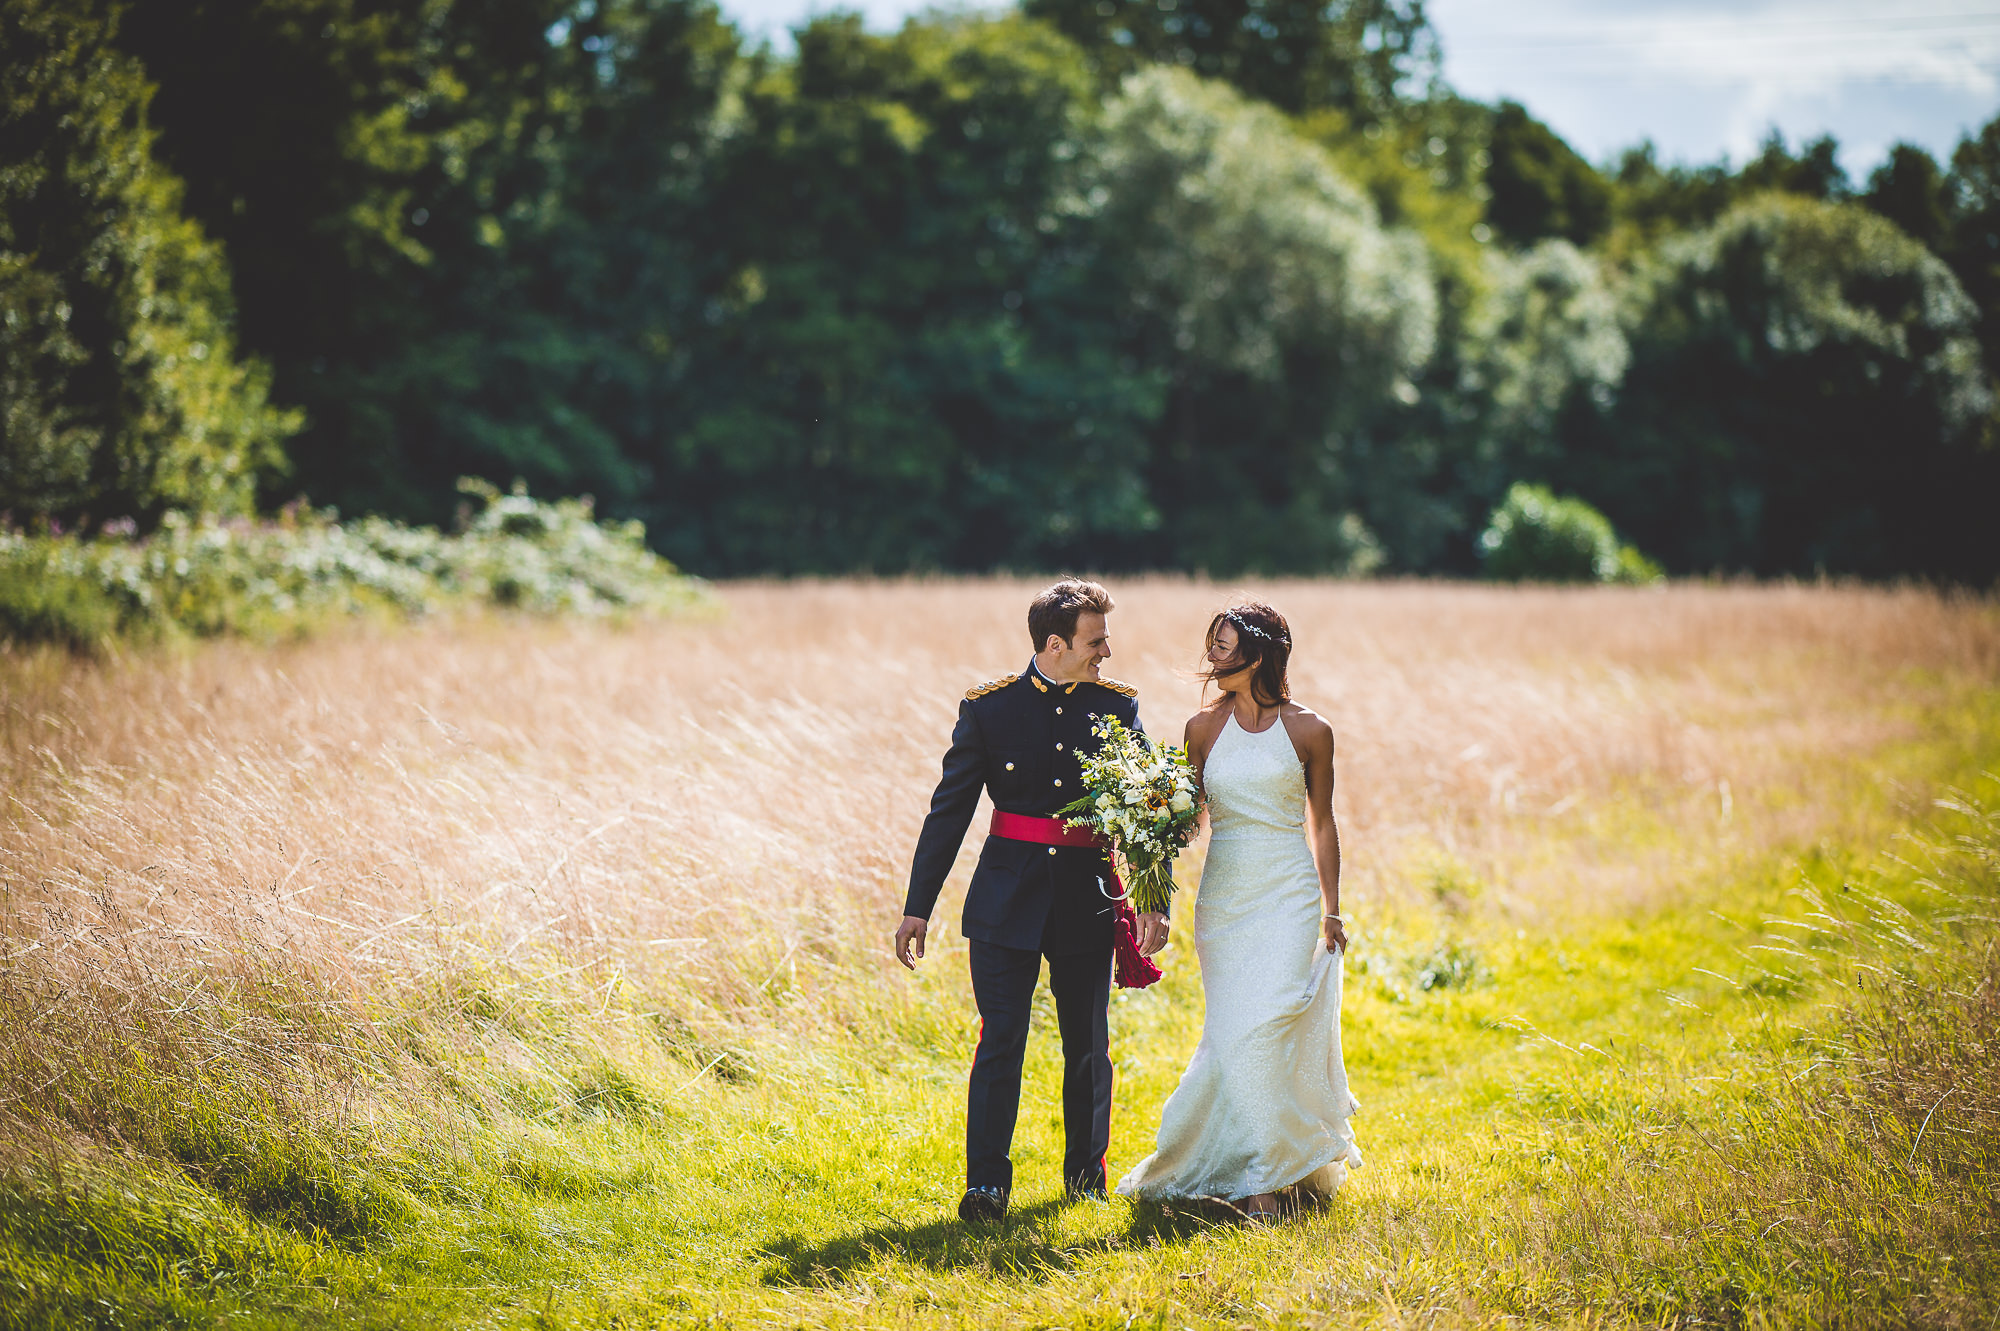 A wedding photographer captures a bride and groom in a field of tall grass, creating a stunning wedding photo.